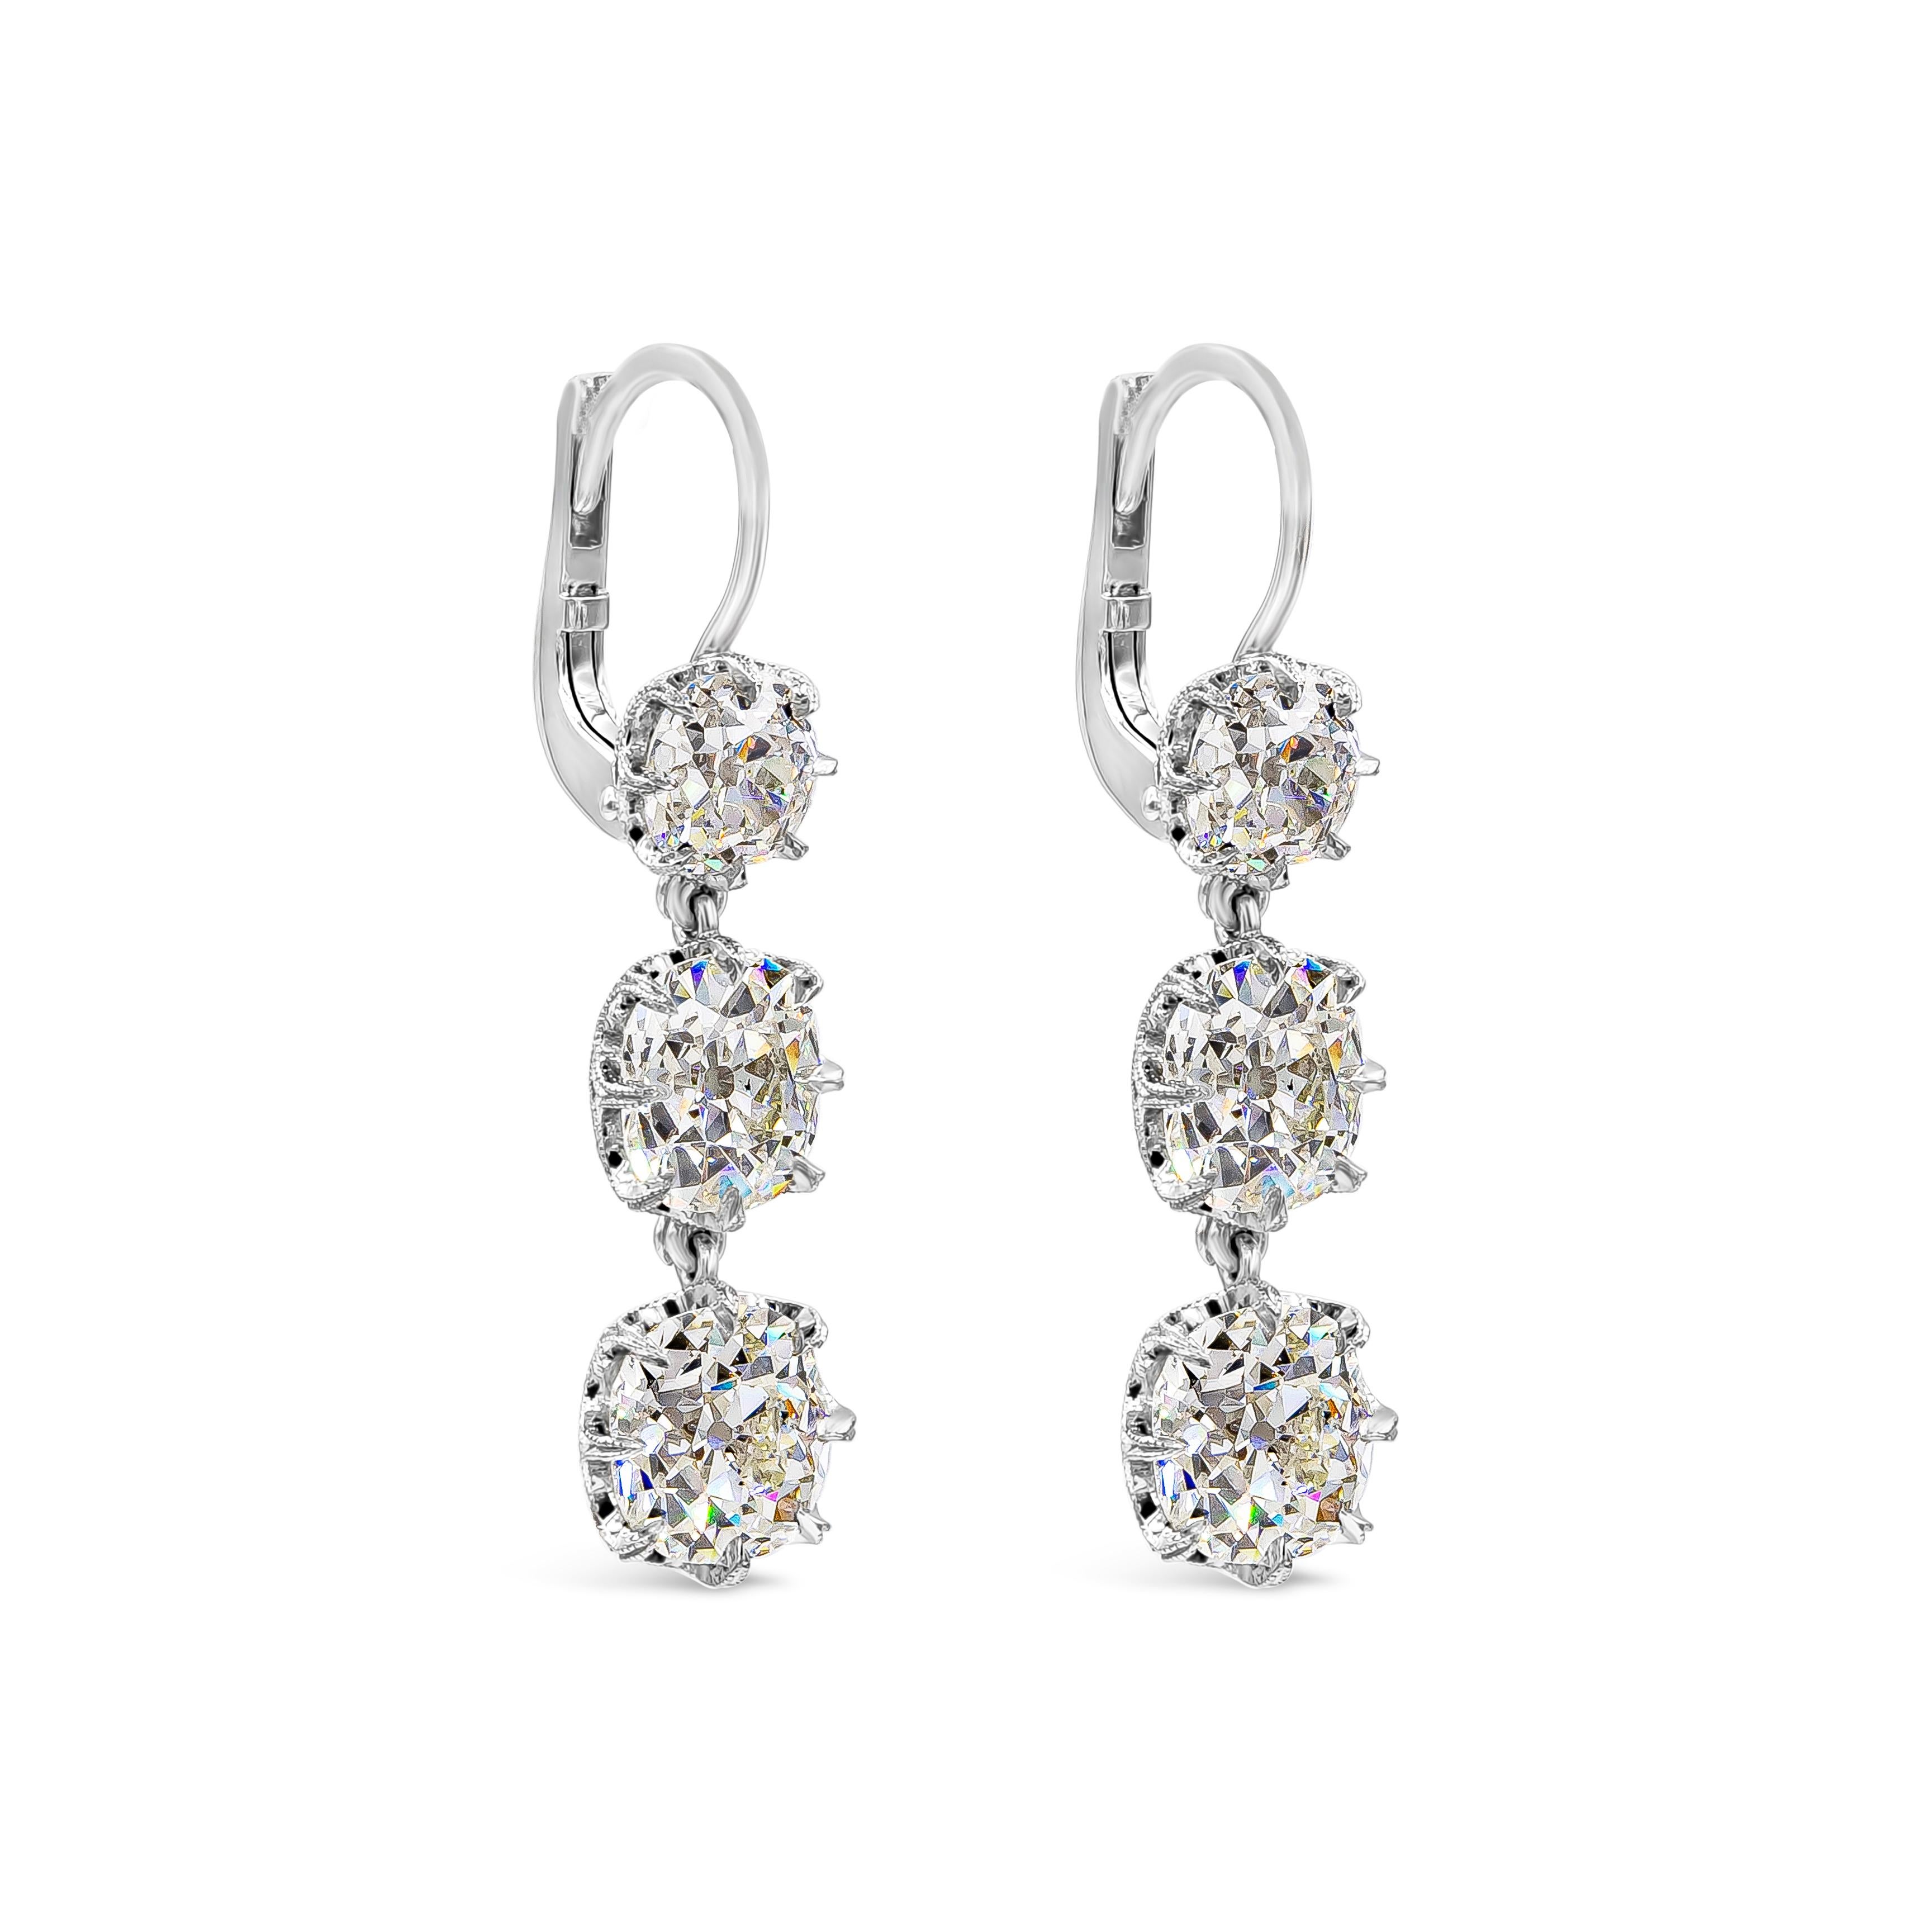 An unique and beautiful pair of drop earrings showcasing 8.64 carats total, old mine cut diamonds certified by GIA as H-J Color and SI2-I1 in Clarity. Hand-crafted and set in an intricately-designed basket. Lever-back mechanism, Made in